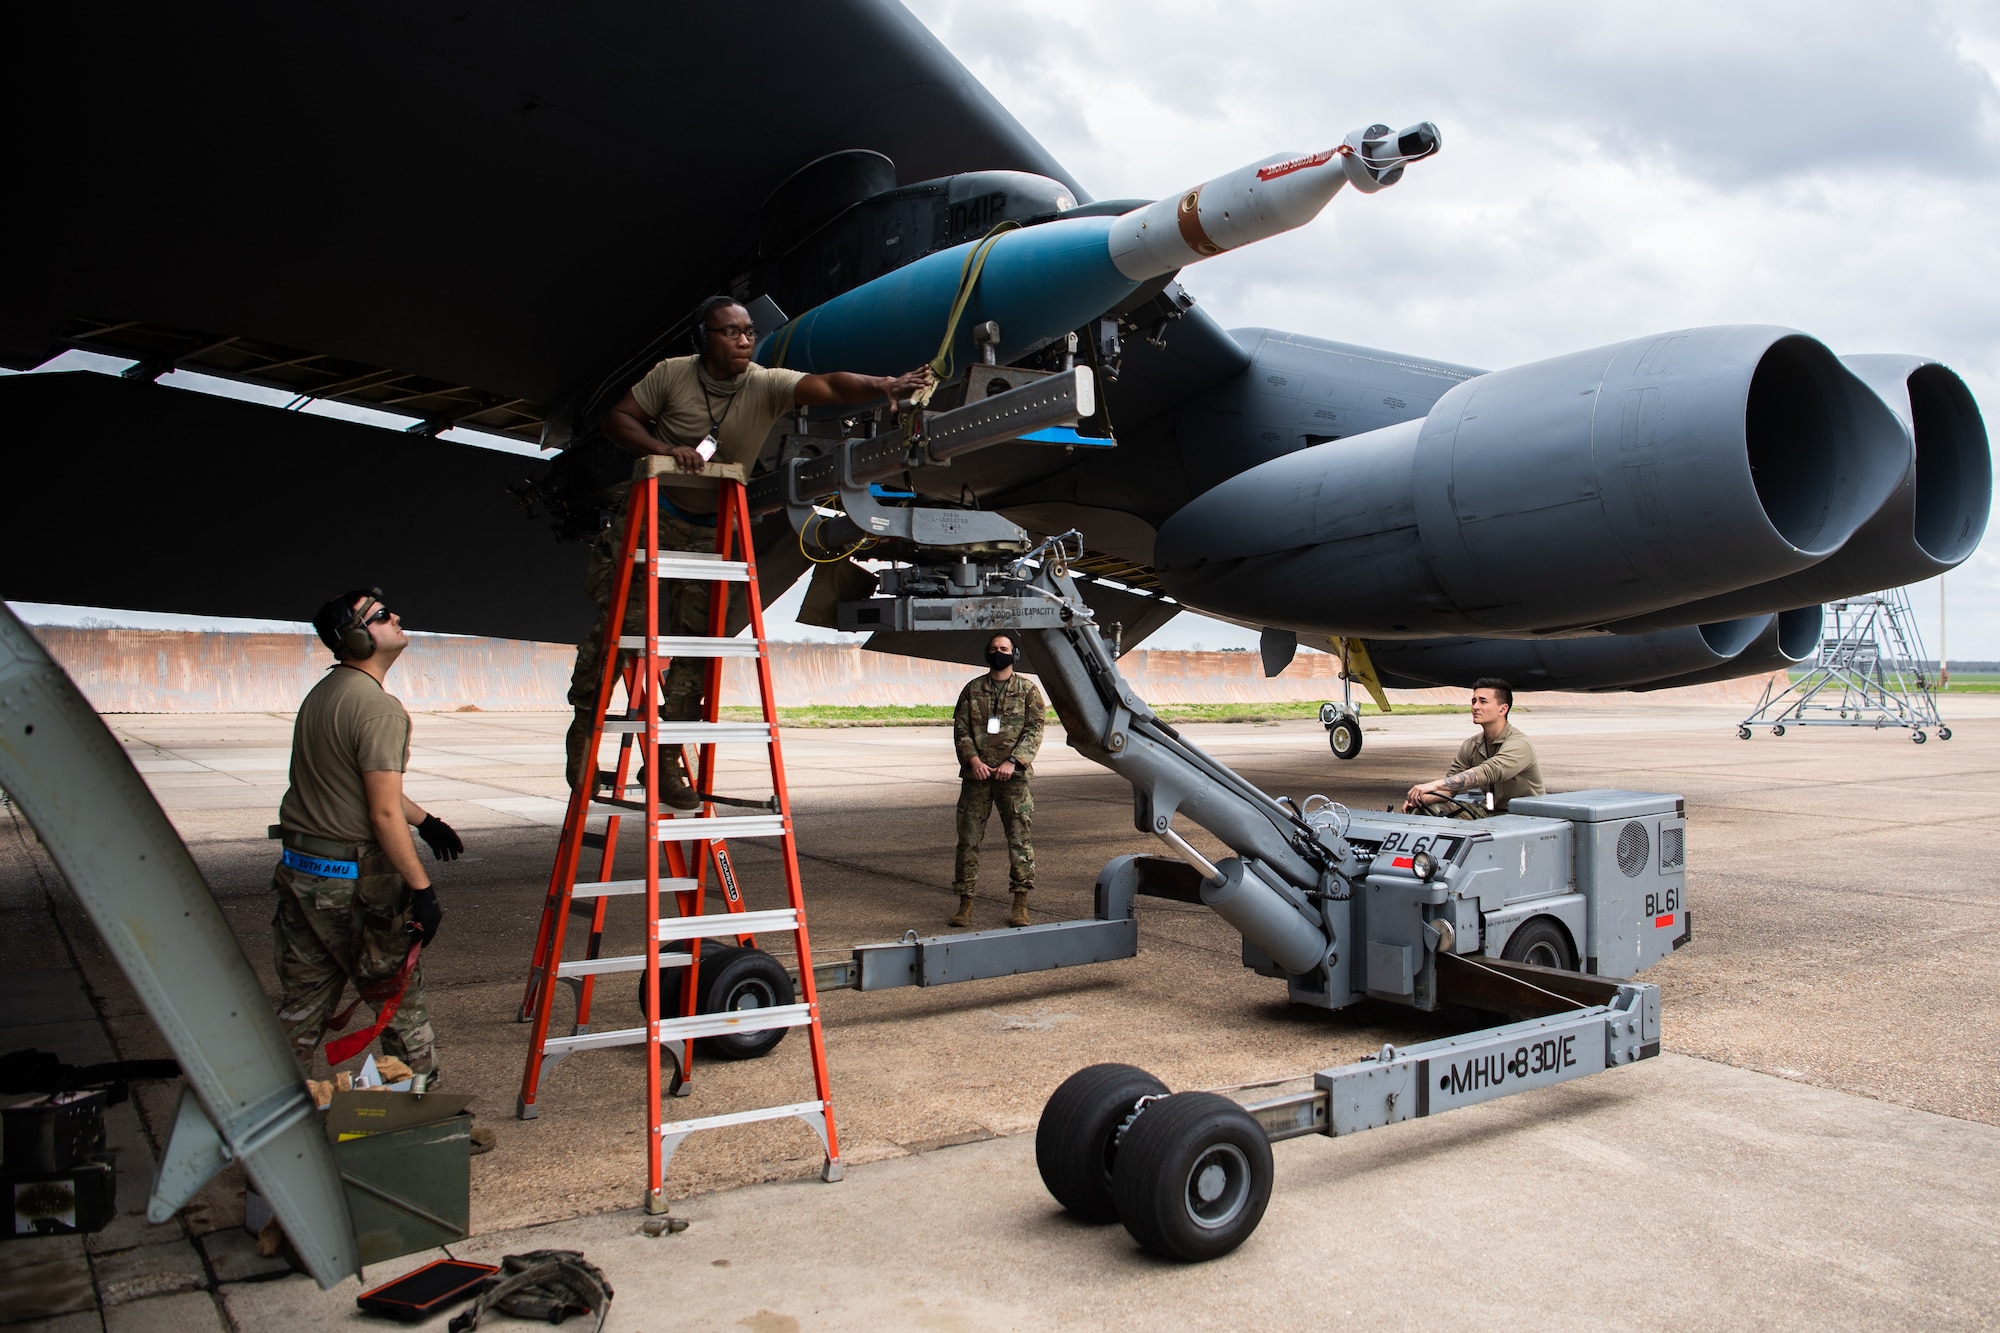 A weapons load crew from the 2nd Aircraft Maintenance Squadron load a GBU-10 munition onto a B-52H Stratofortress during Combat Hammer at Barksdale Air Force Base, La., March 10, 2021. Combat Hammer was an exercise that encompassed end-to-end evaluations from units across the wing, assessing proficiency across the board. (U.S. Air Force photo by Airman 1st Class Jacob B. Wrightsman)